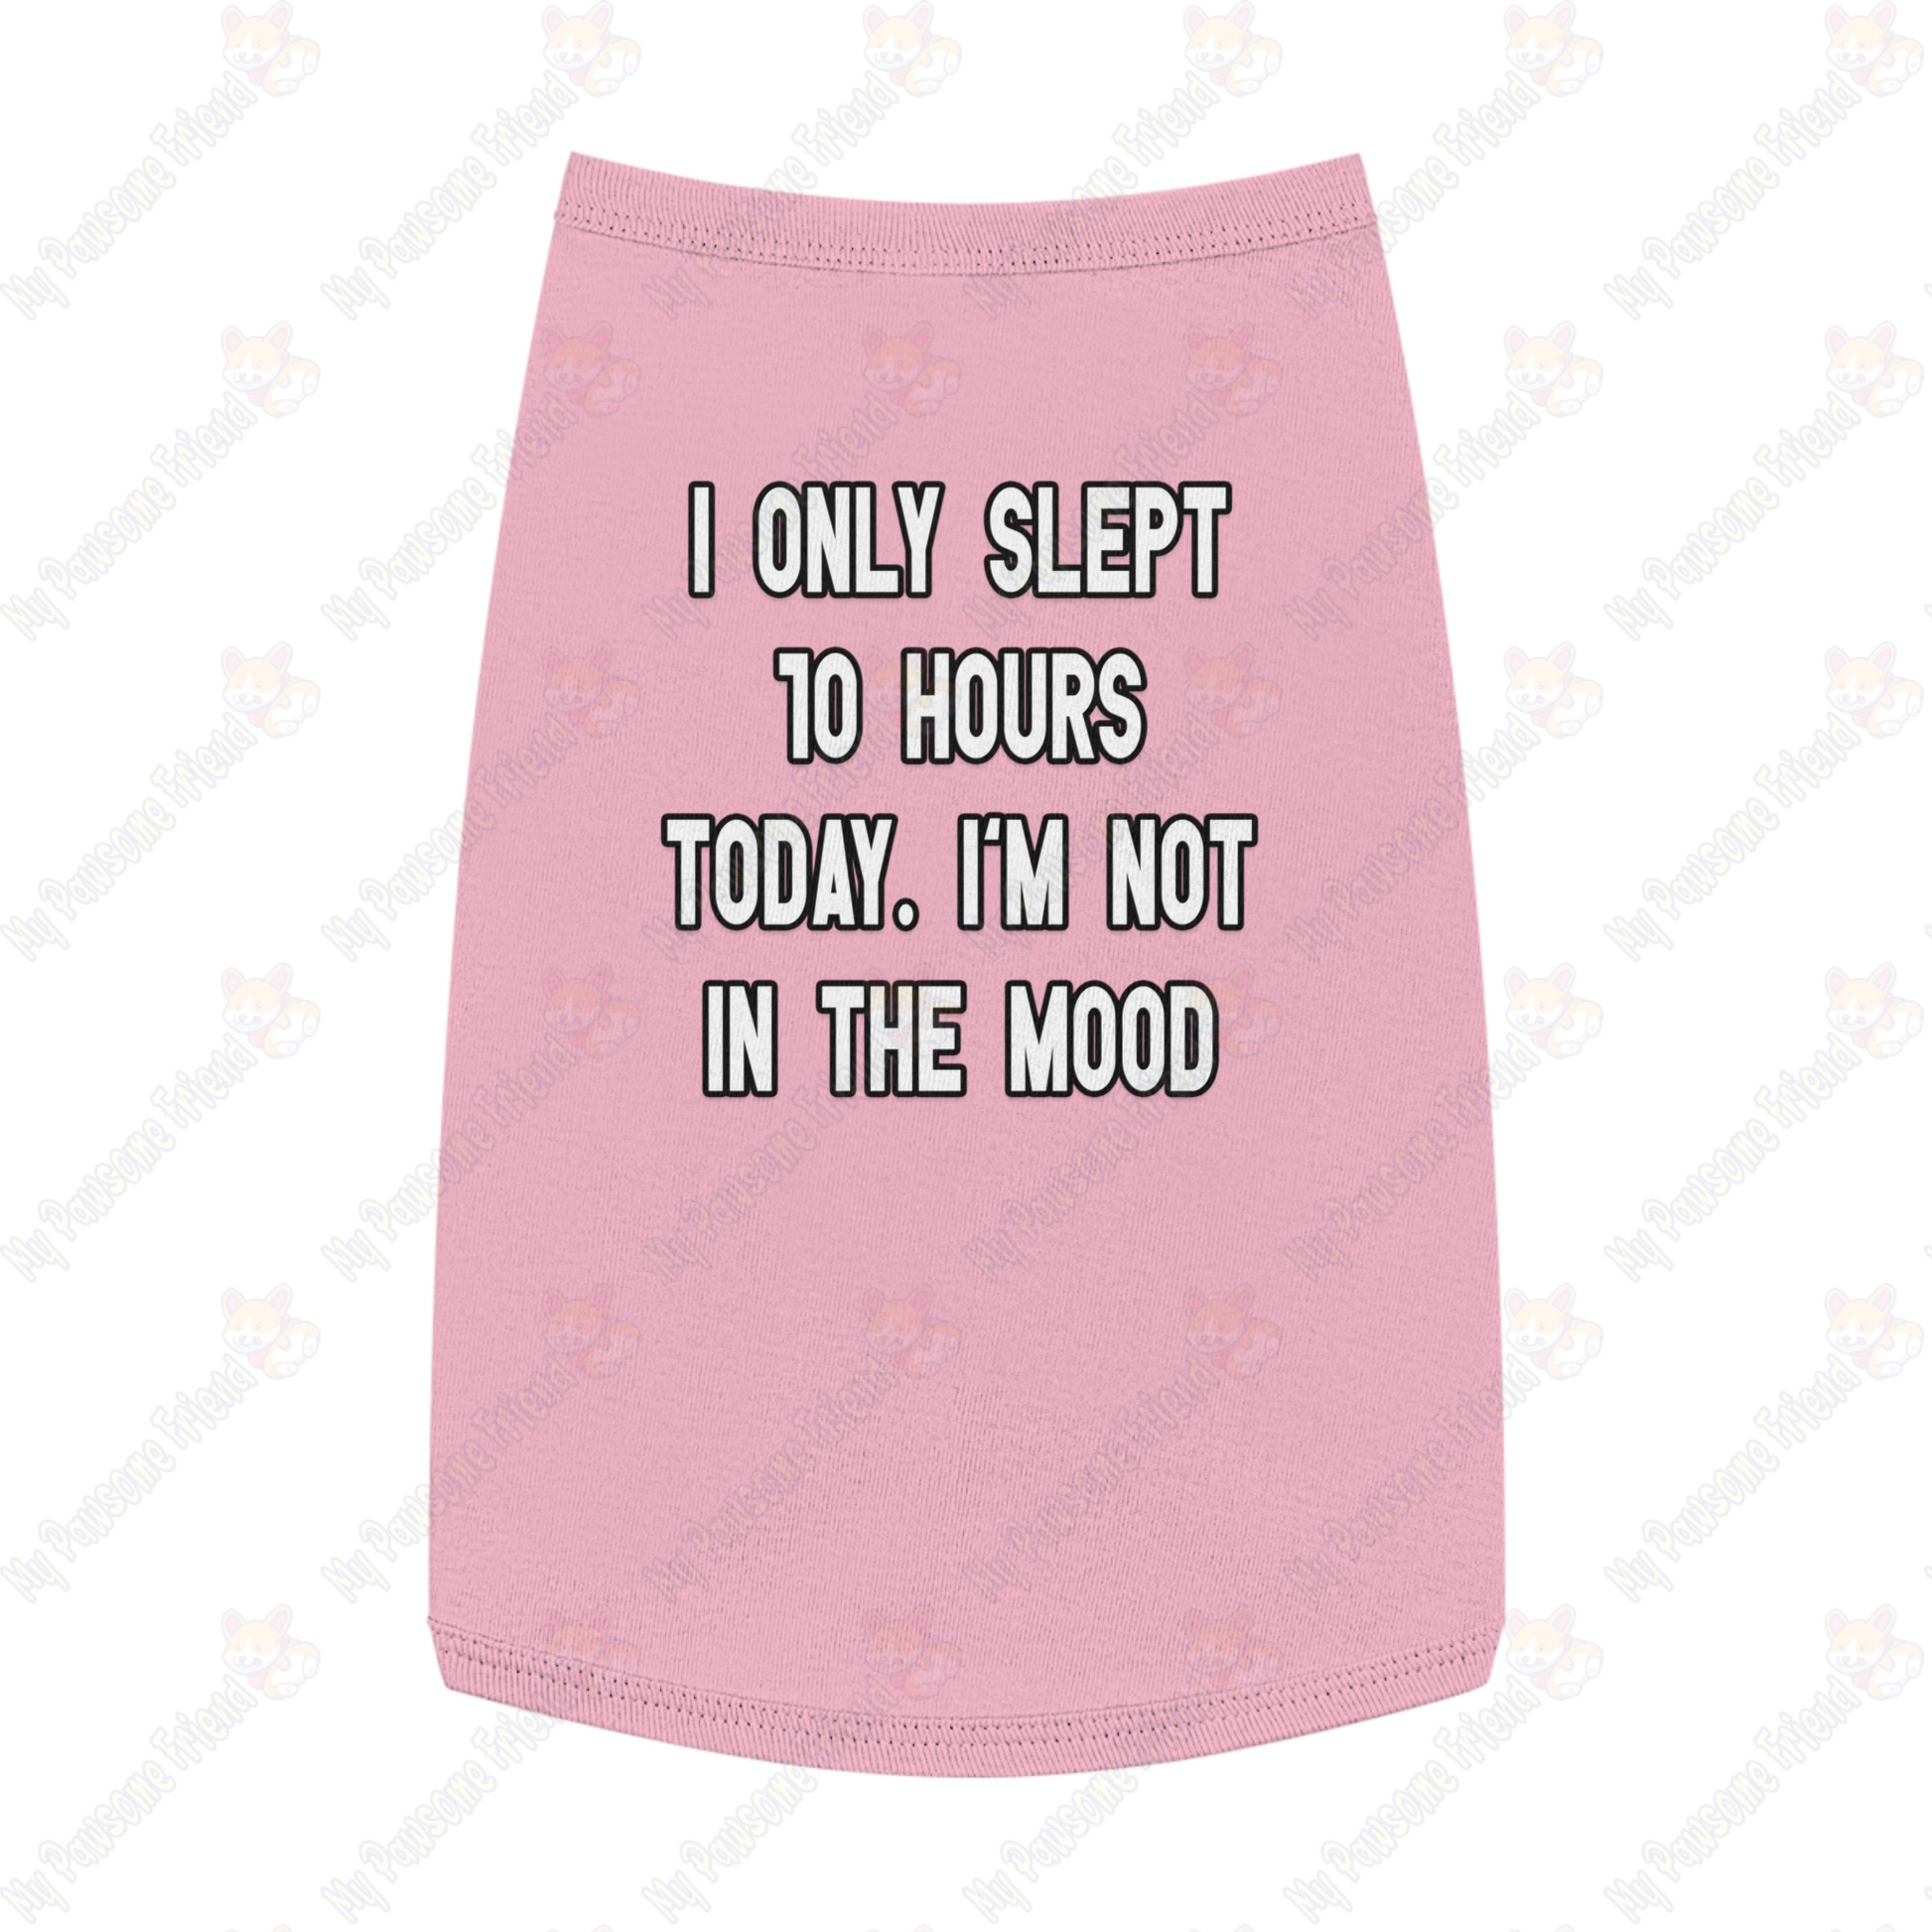 I ONLY SLEPT 10 HOURS TODAY. I'M NOT IN THE MOOD Pet Tank Top pink